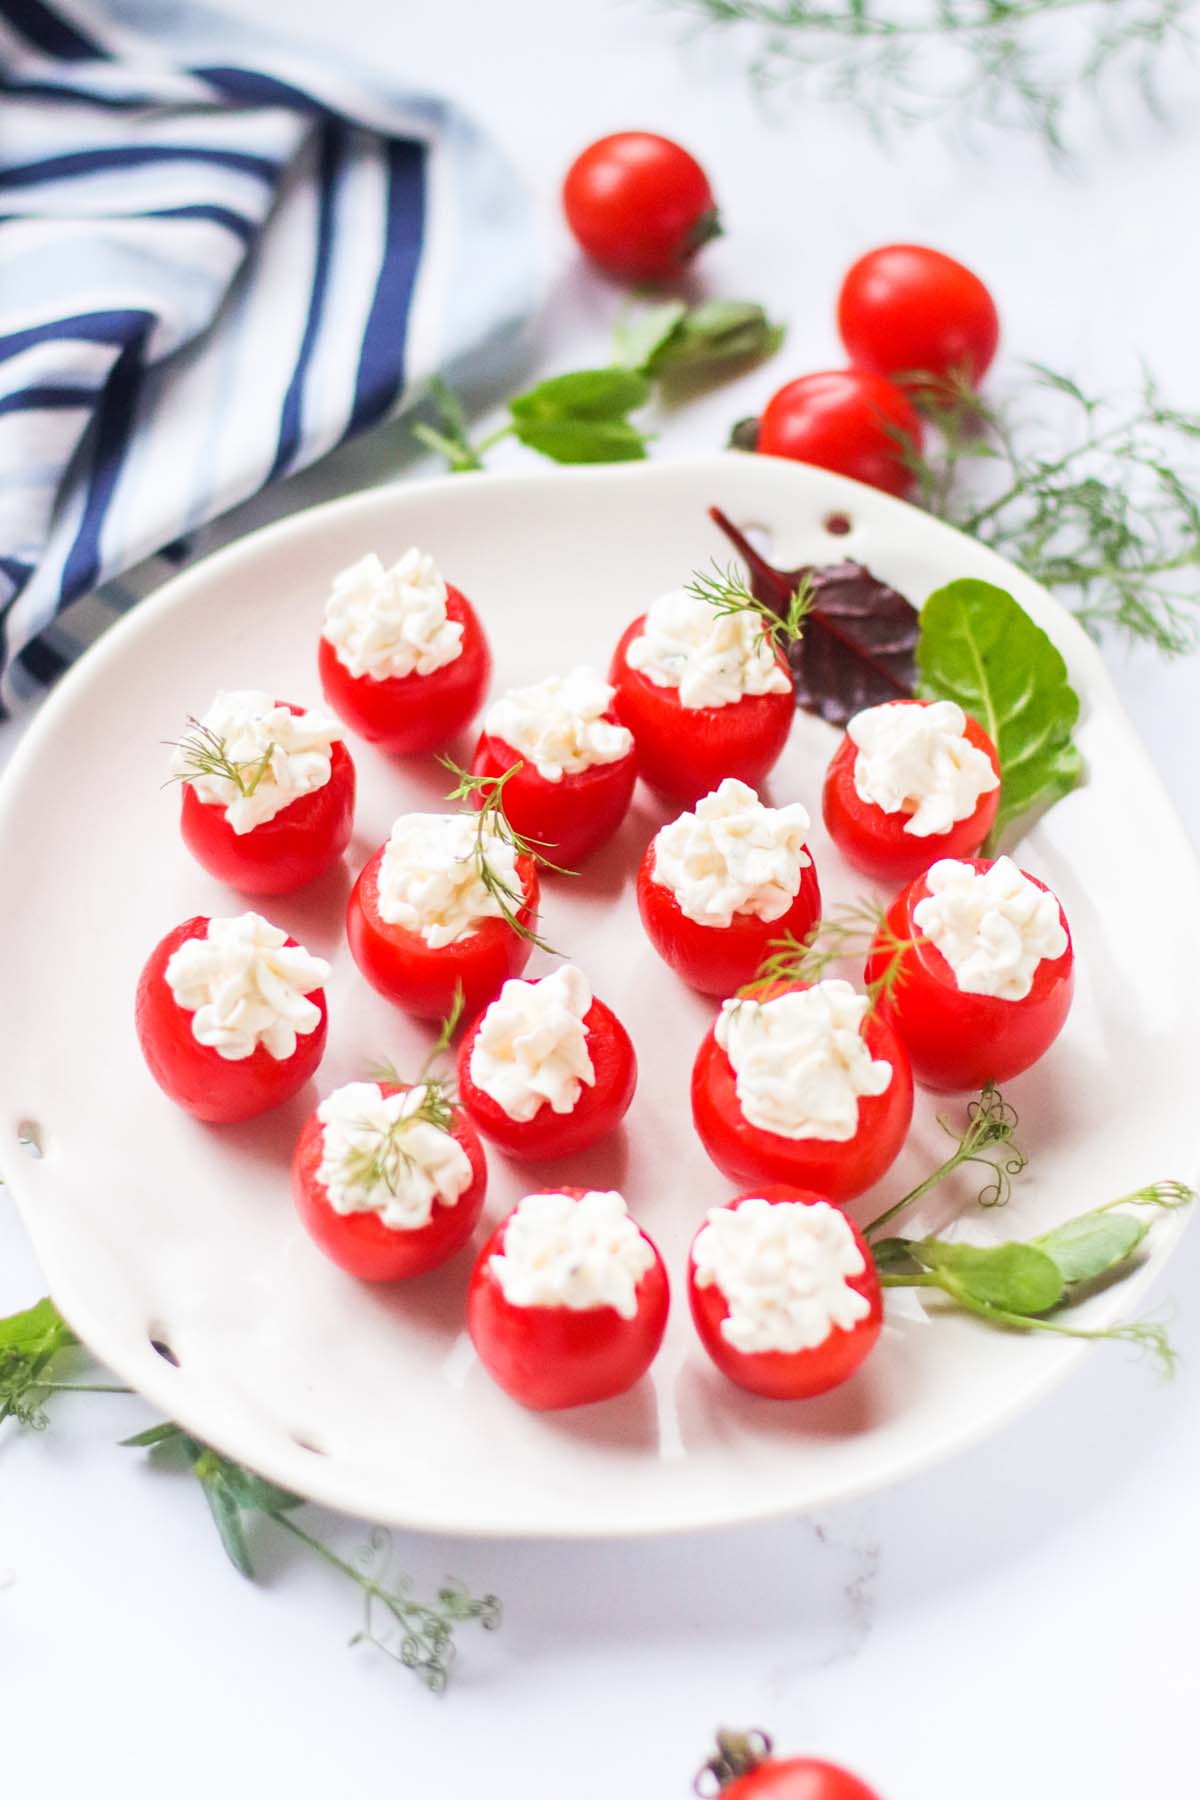 stuffed tomatoes on a plate with green herbs.